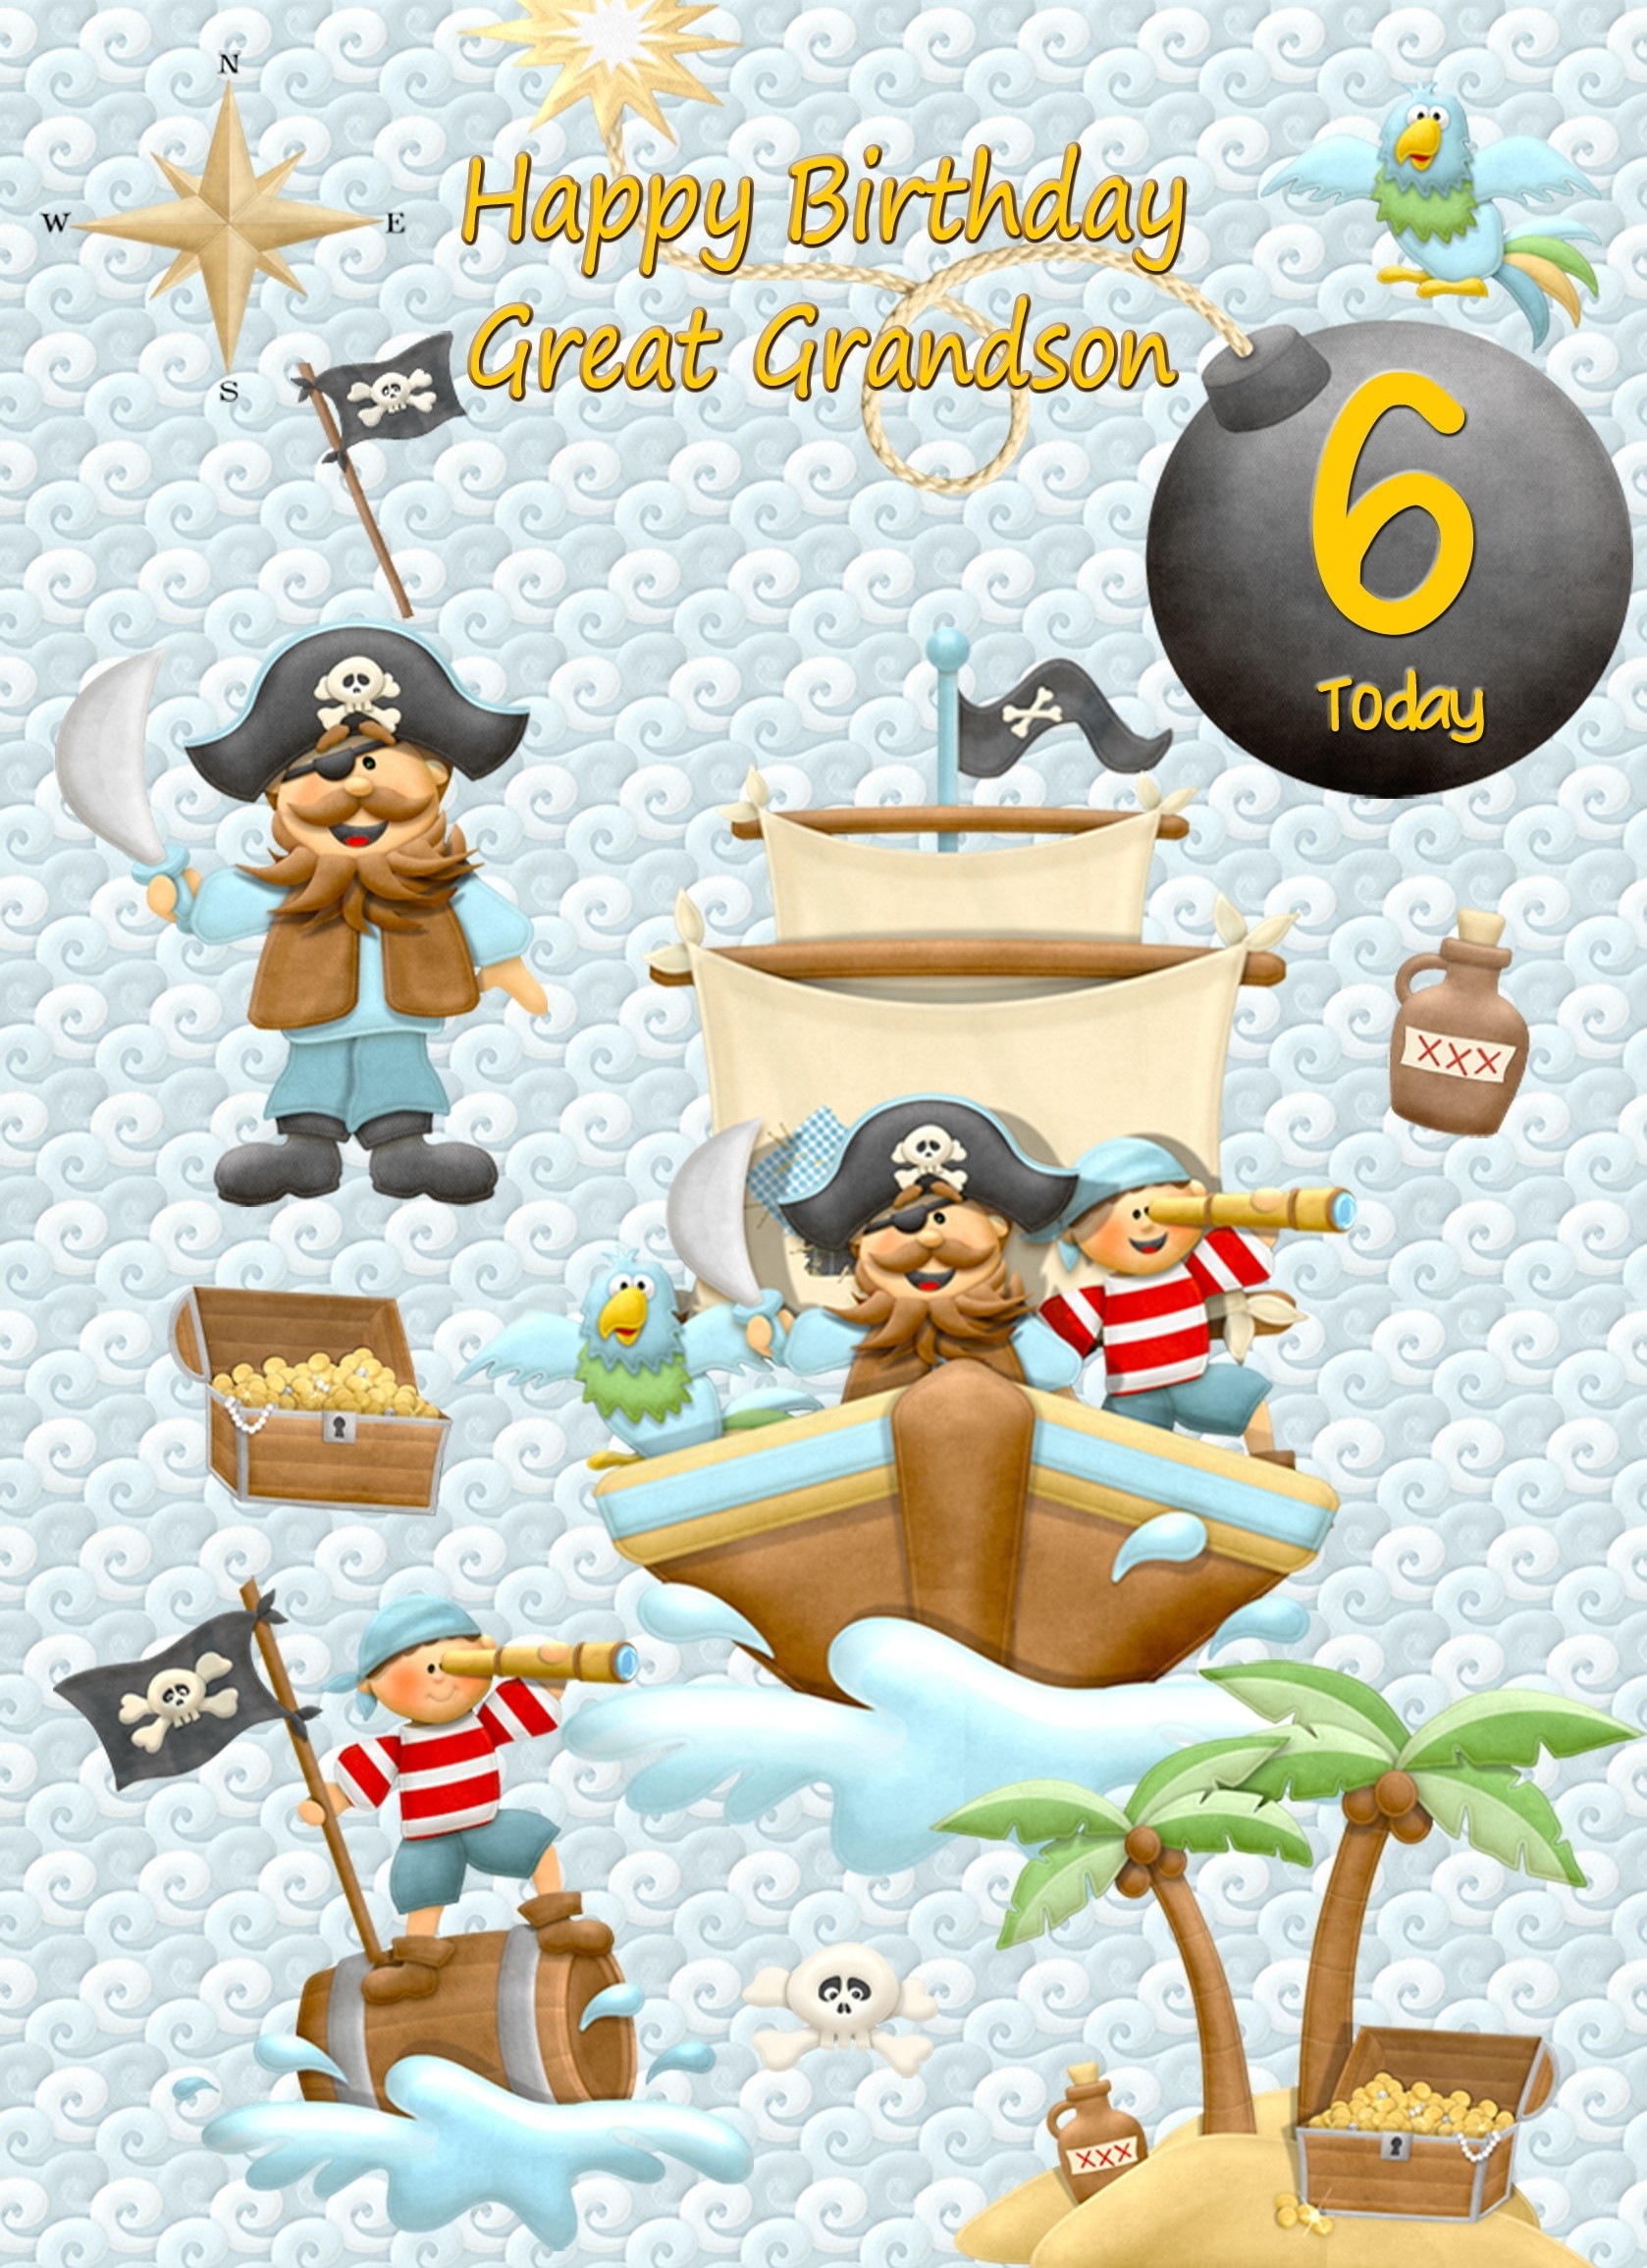 Kids 6th Birthday Pirate Cartoon Card for Great Grandson